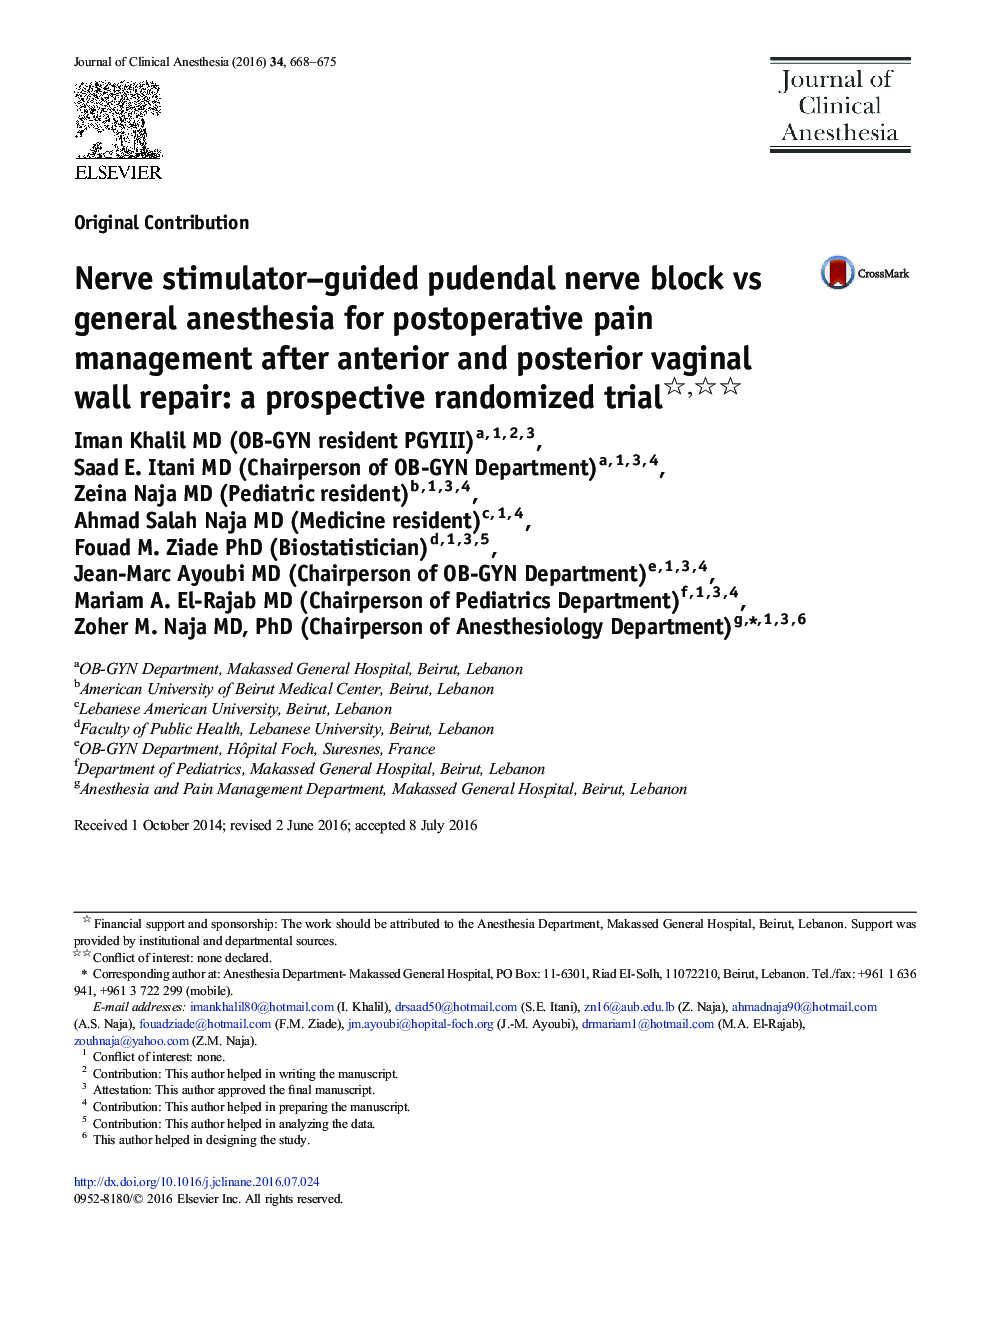 Nerve stimulator-guided pudendal nerve block vs general anesthesia for postoperative pain management after anterior and posterior vaginal wall repair: a prospective randomized trial